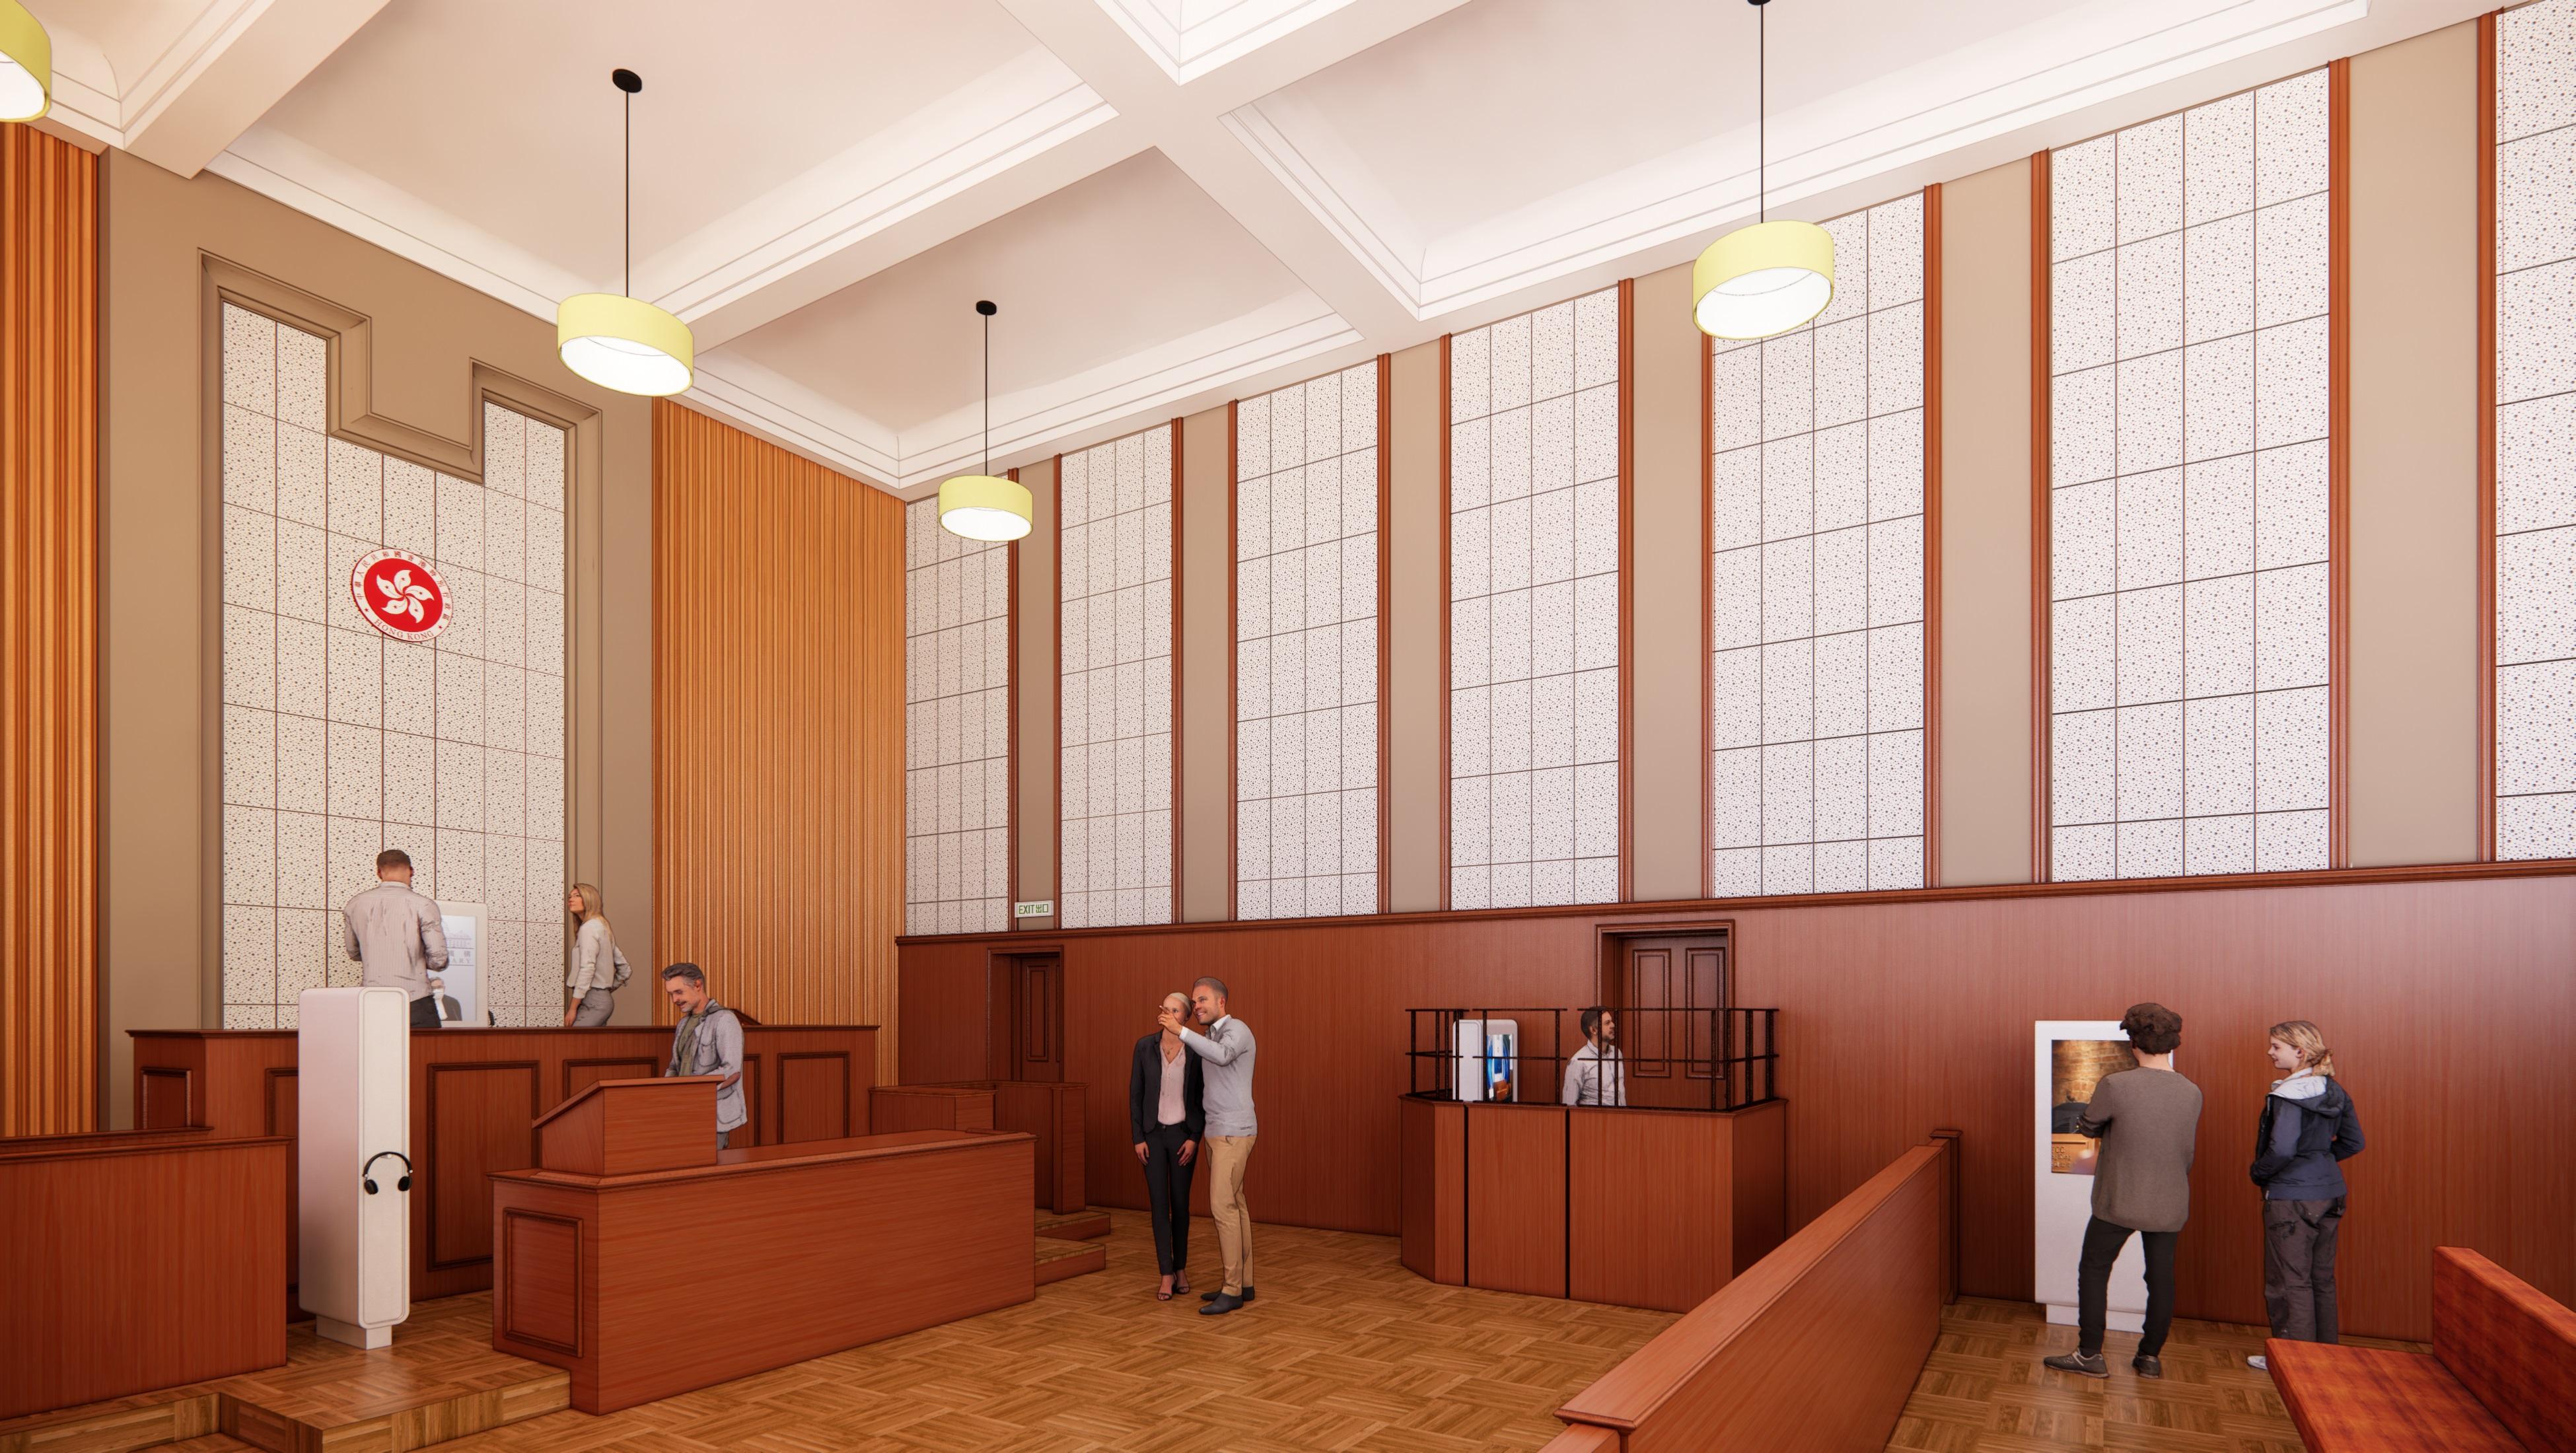 The Development Bureau announced today (December 8) that the project proposed by the Society of Rehabilitation and Crime Prevention, Hong Kong has been selected to revitalise the Former North Kowloon Magistracy under Batch VI of the Revitalising Historic Buildings Through Partnership Scheme. Photo shows a photomontage of the "mock court", after revitalisation of the Magistracy's court area.